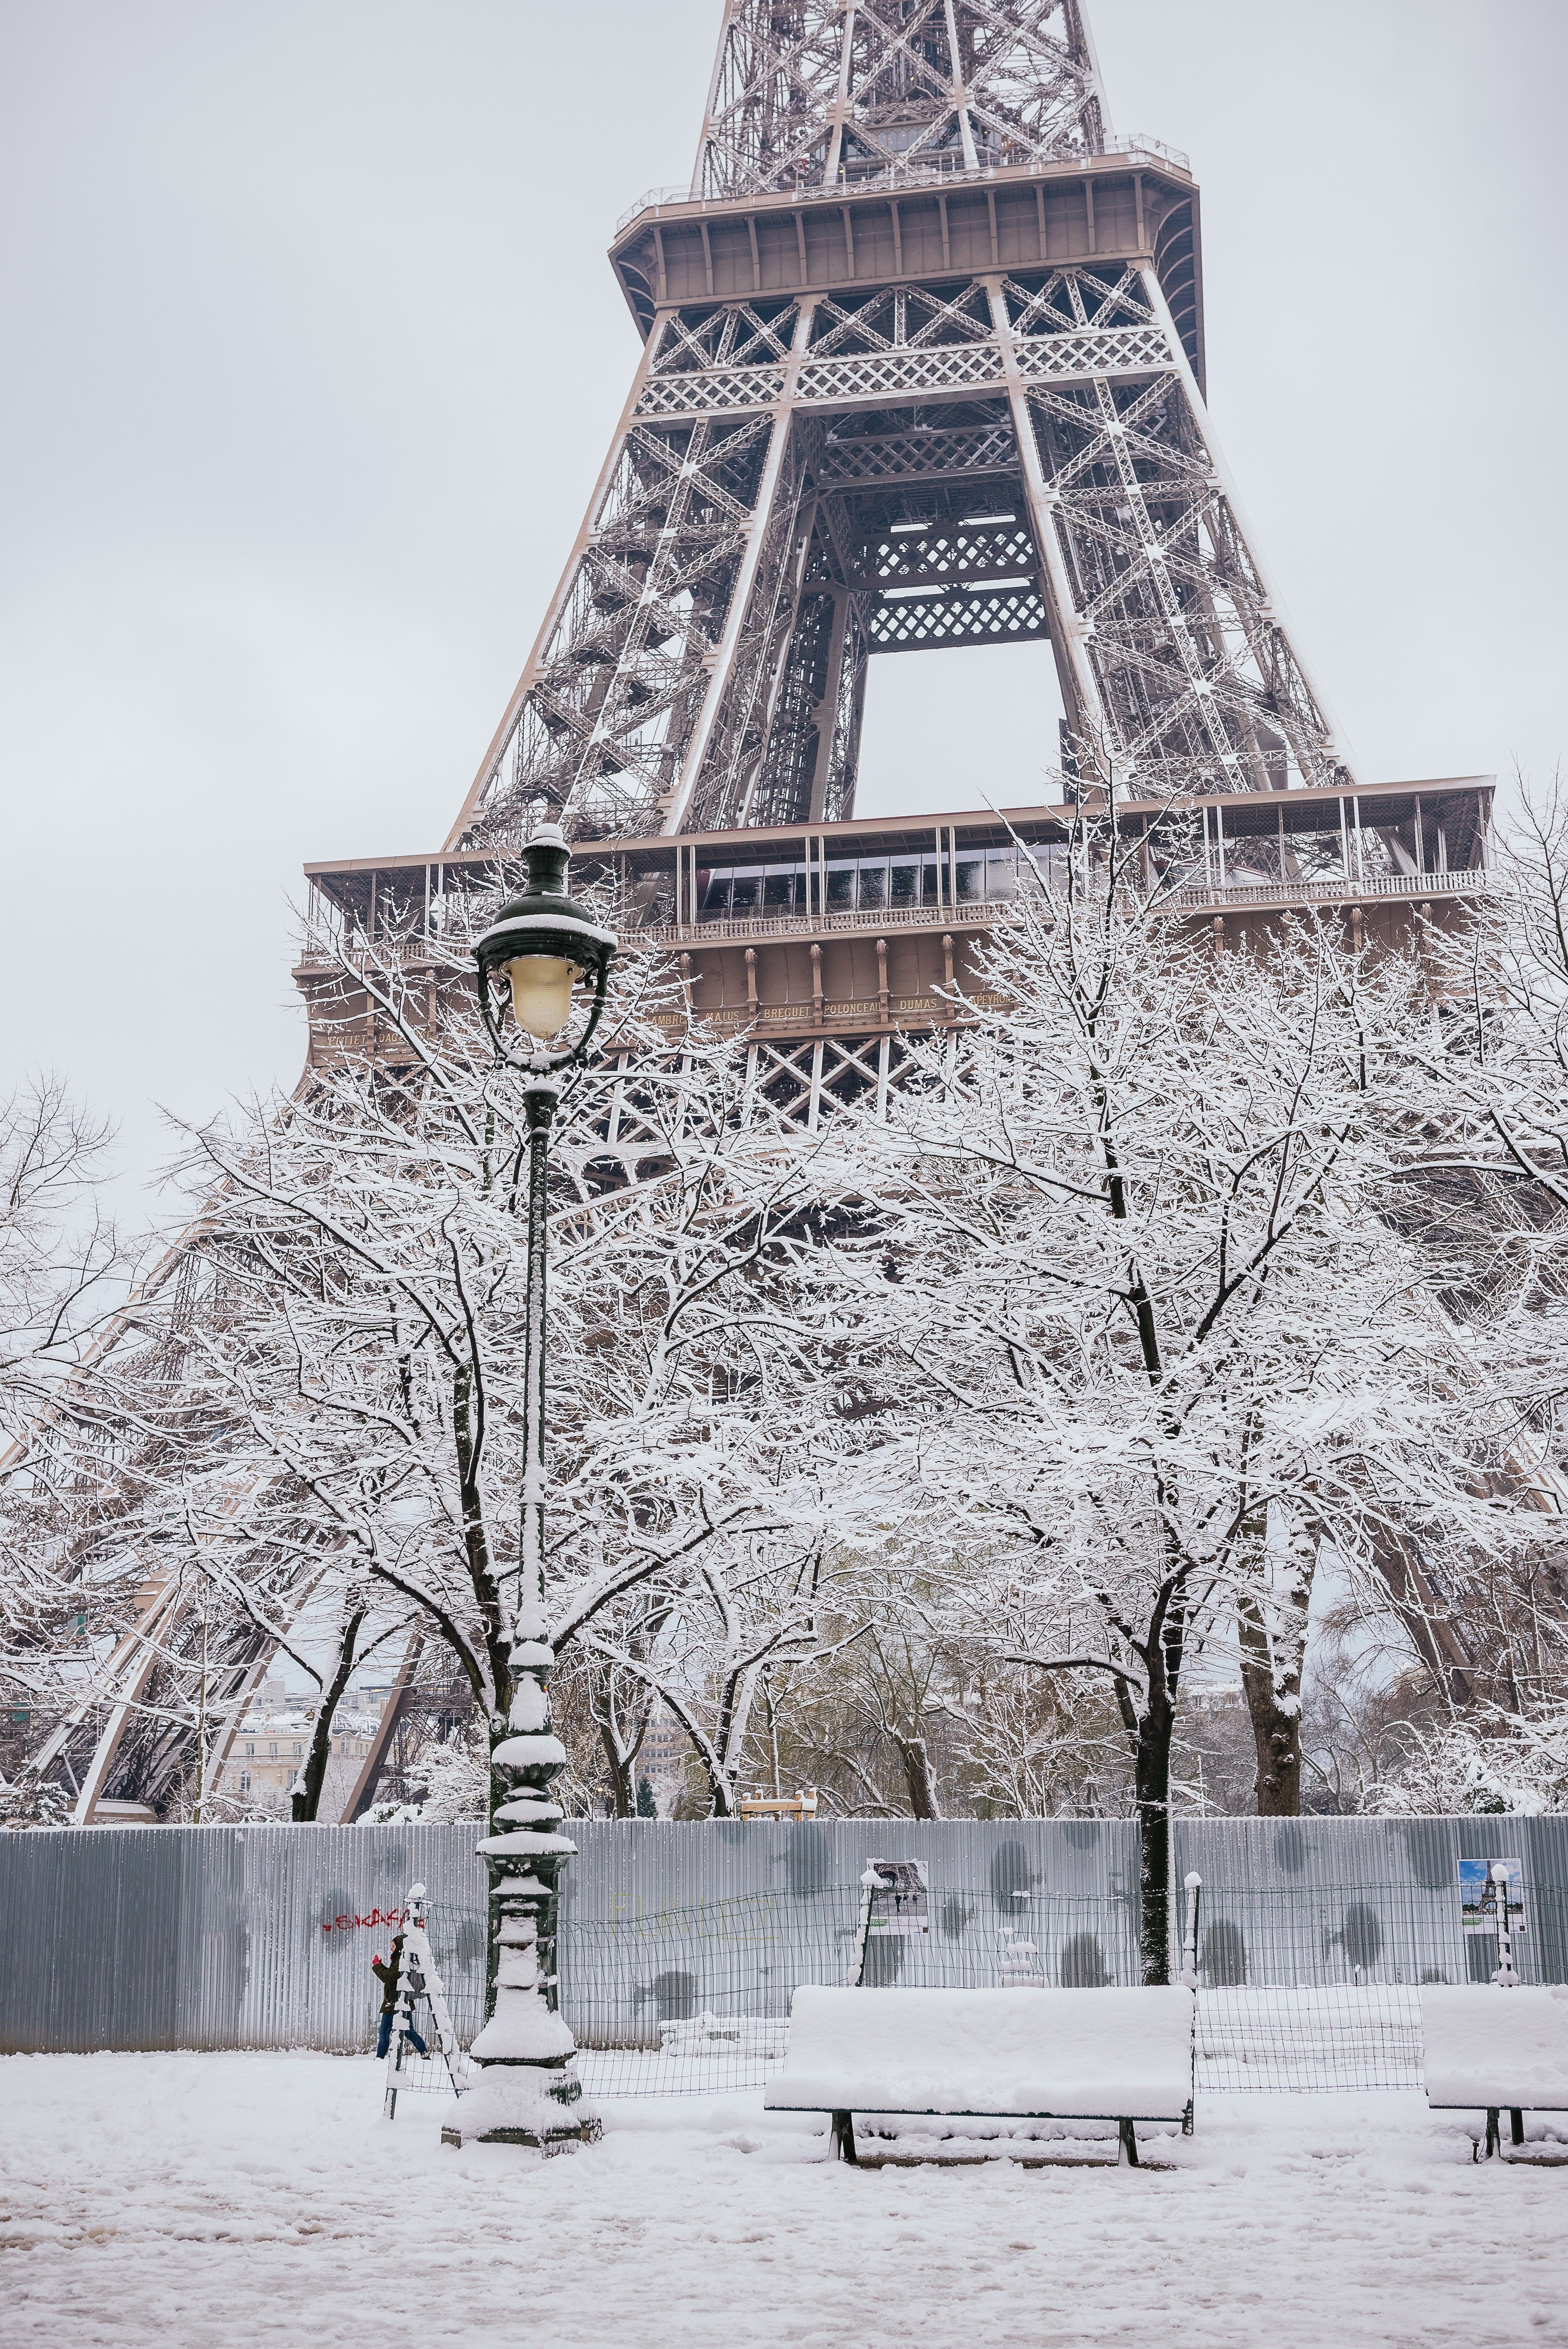 Winter landscape from Paris. The Eiffel Tower covered in snow. February 2018. #parisphotographer #winterinparis #parisw. Paris photo, Paris snow, Paris winter